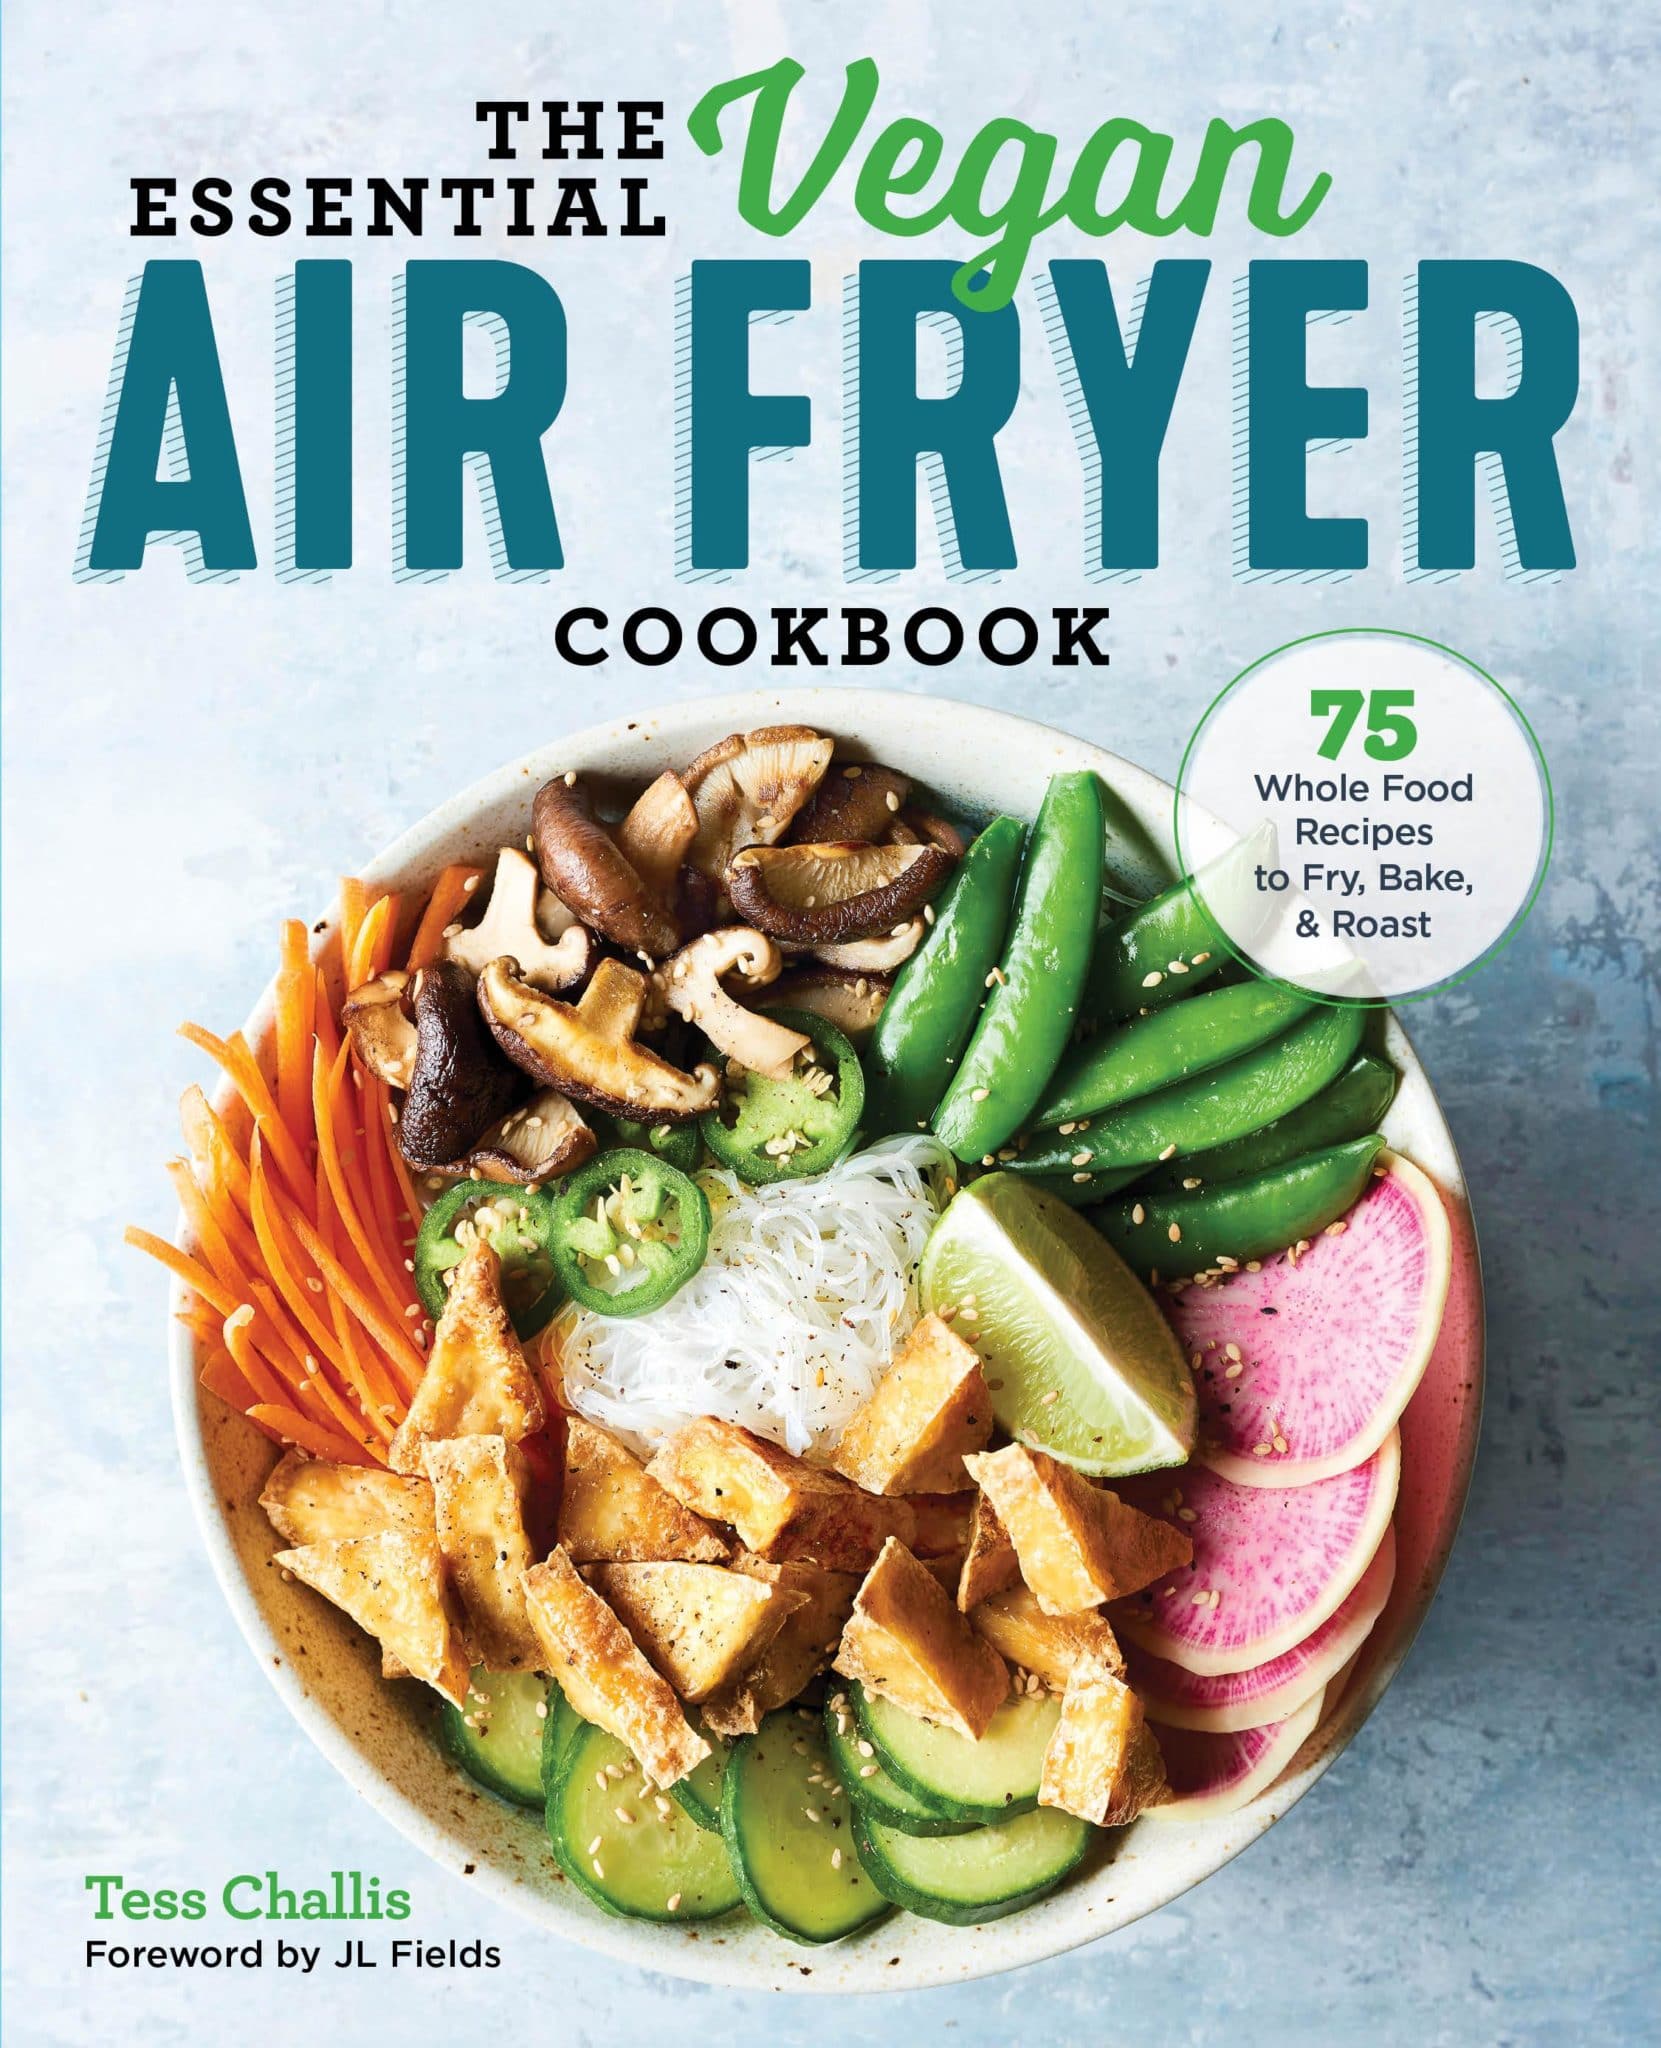 The Essential Vegan Air Fryer Cookbook: 75 Whole Food Recipes to Fry, Bake, and Roast by Tess Challis